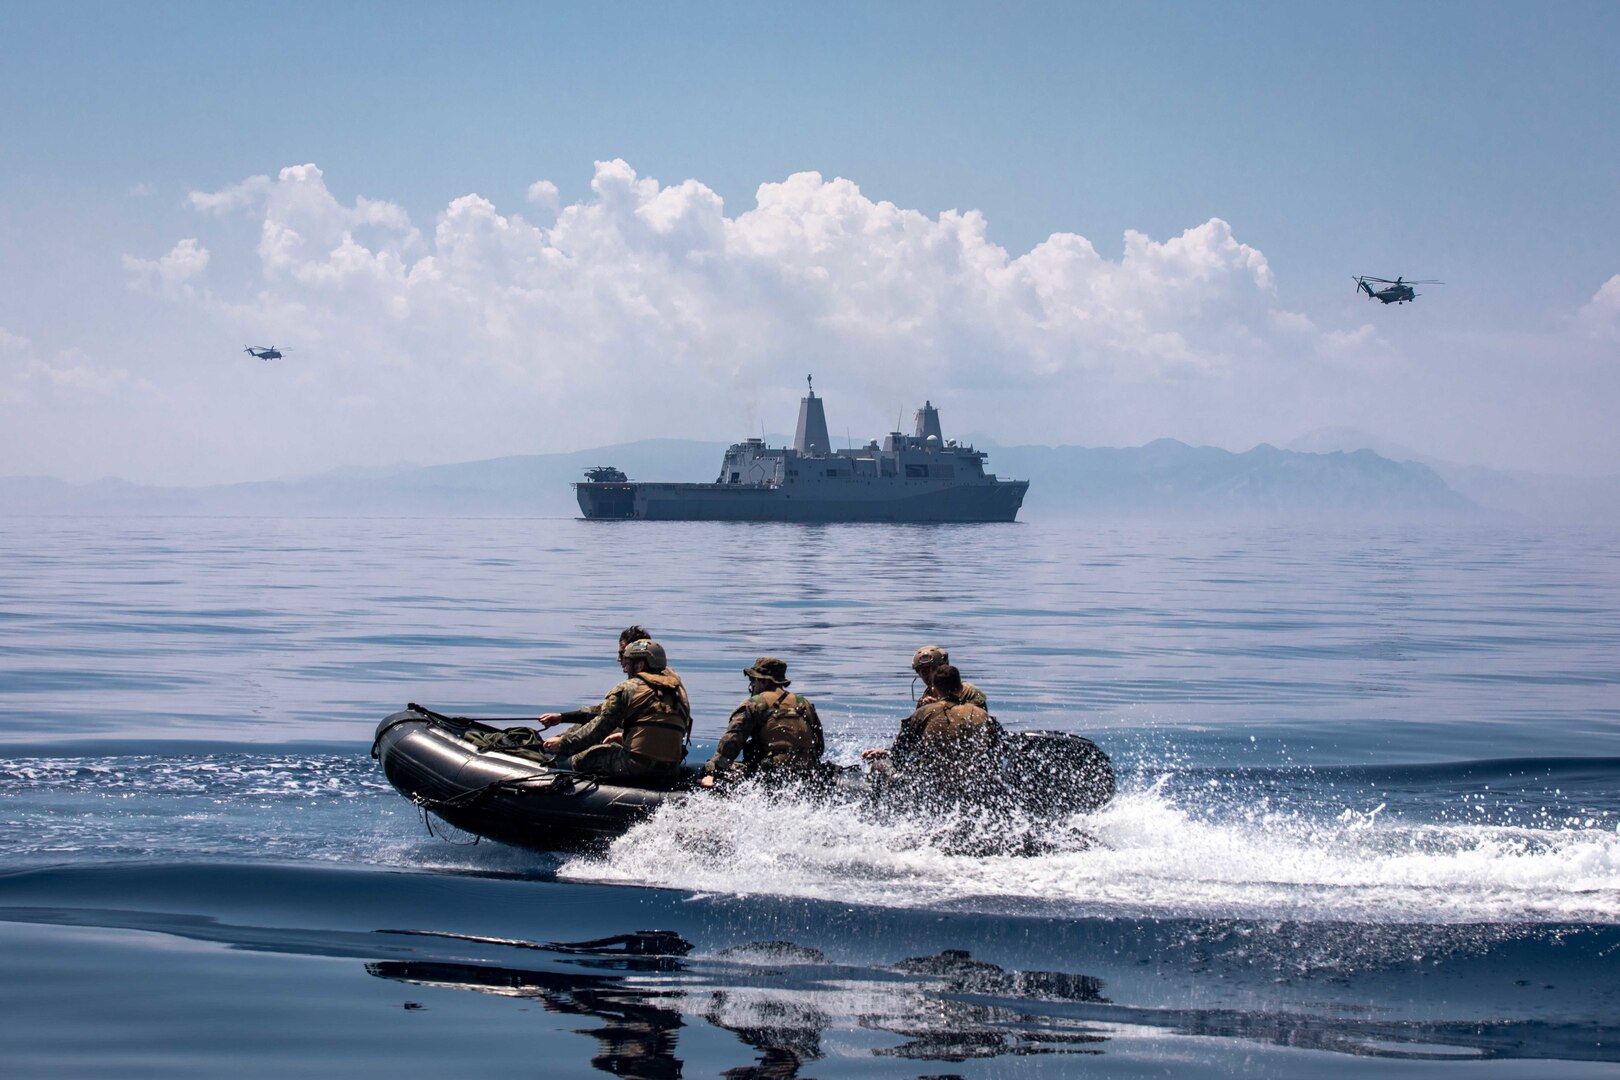 (May 16, 2022) U.S. Marines attached to the 22nd Marine Expeditionary Unit return to the San Antonio-class amphibious transport dock ship USS Arlington (LPD 24) in a combat rubber raiding craft after joint training with Hellenic Armed Forces off the coast of Skyros Island, Greece, May 16, 2022. Arlington, with embarked 22nd Marine Expeditionary Unit, is participating in exercise Alexander the Great 2022 under the command and control of Task Force 61/2. Alexander the Great 22 strengthens interoperability and force readiness between the U.S., Greece, and Allied nations, enhancing strategic defense and partnership while promoting security and stability in the region.